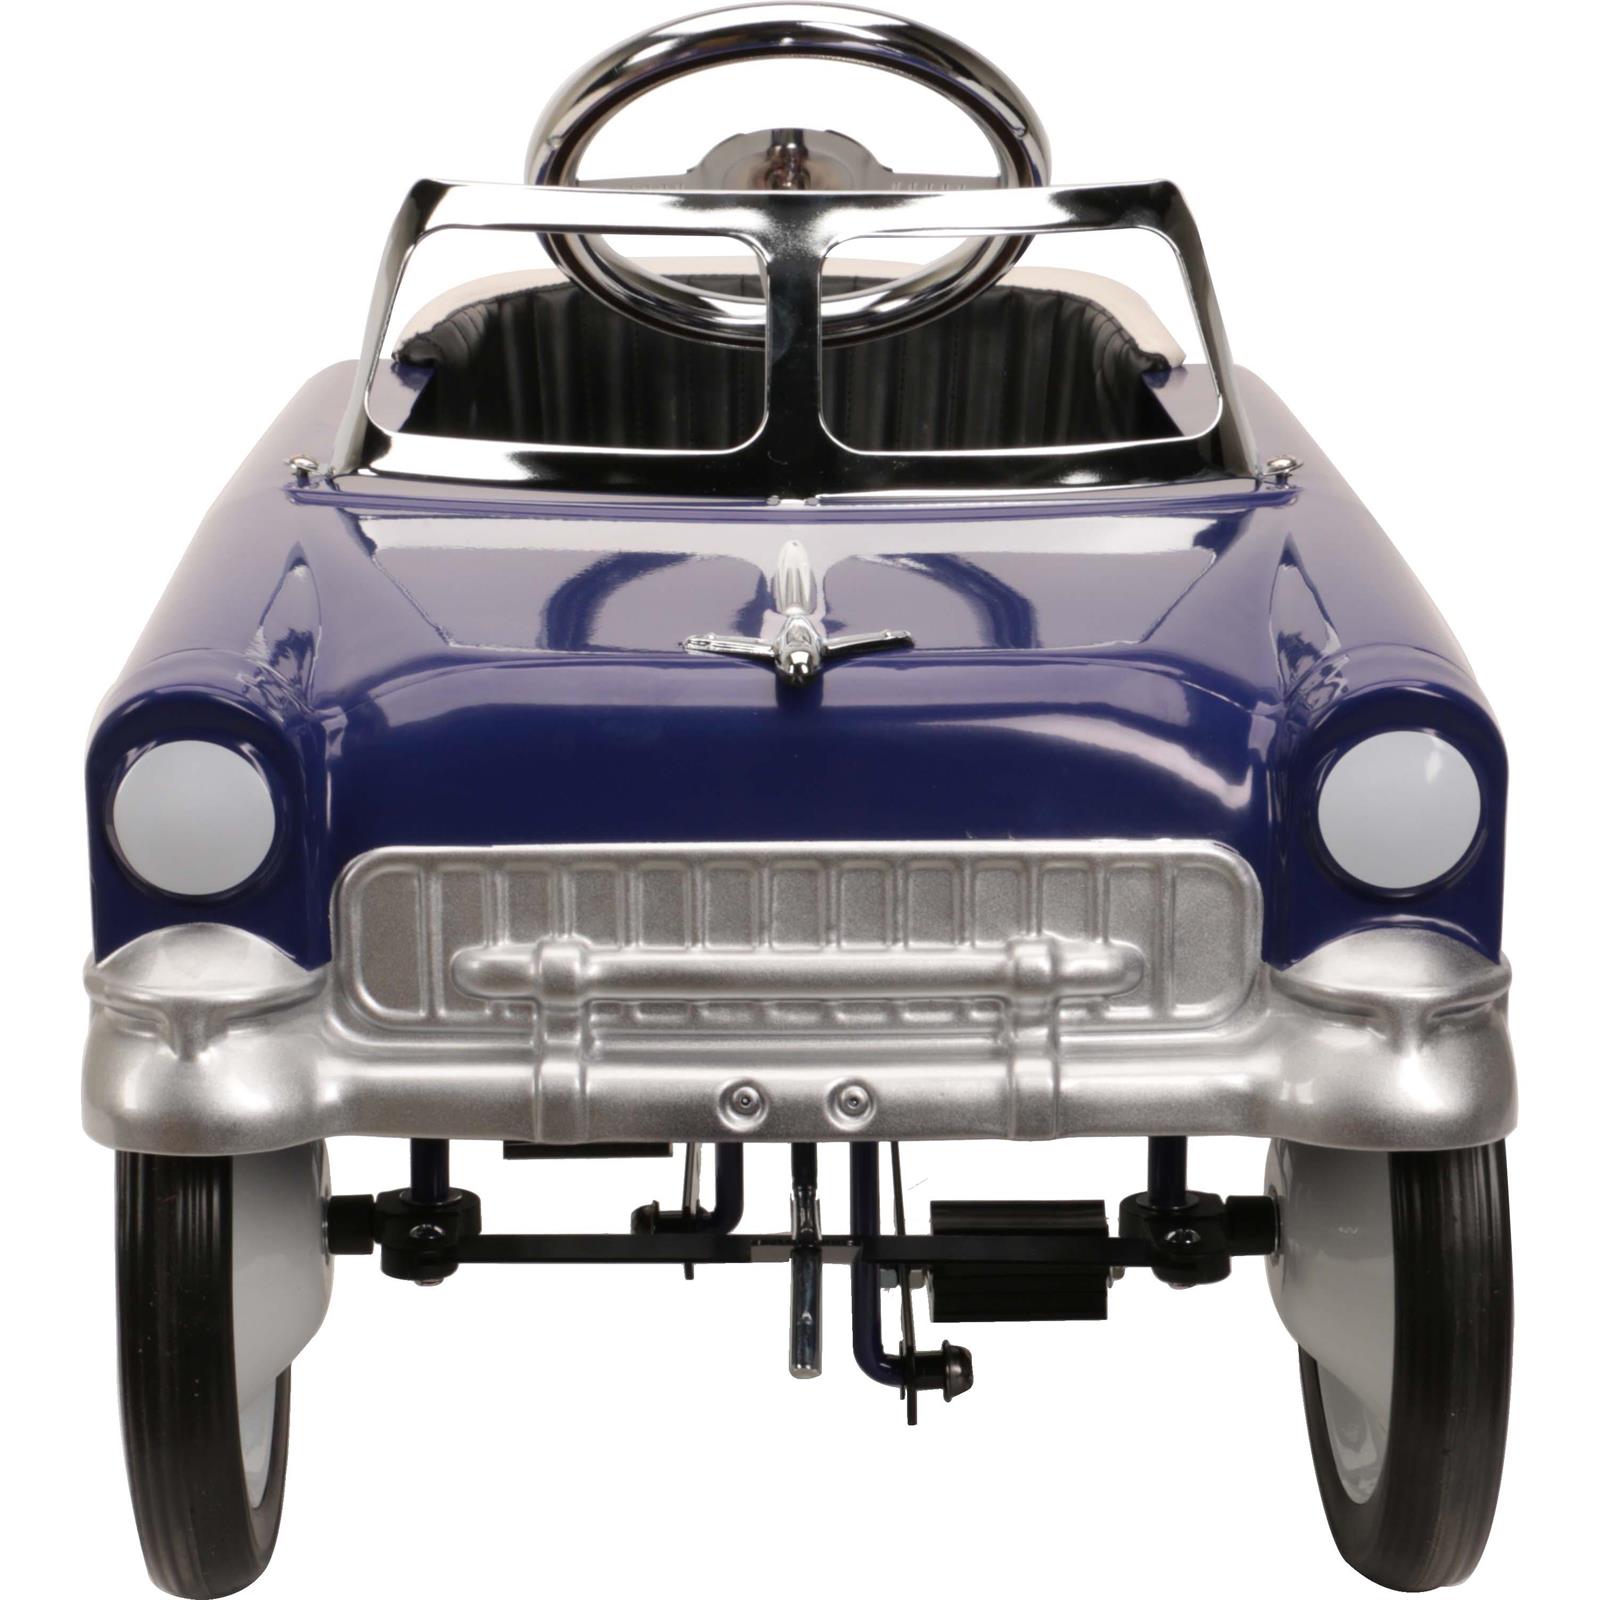 1955 Chevy Pedal Car - Purple / White - image 2 of 3